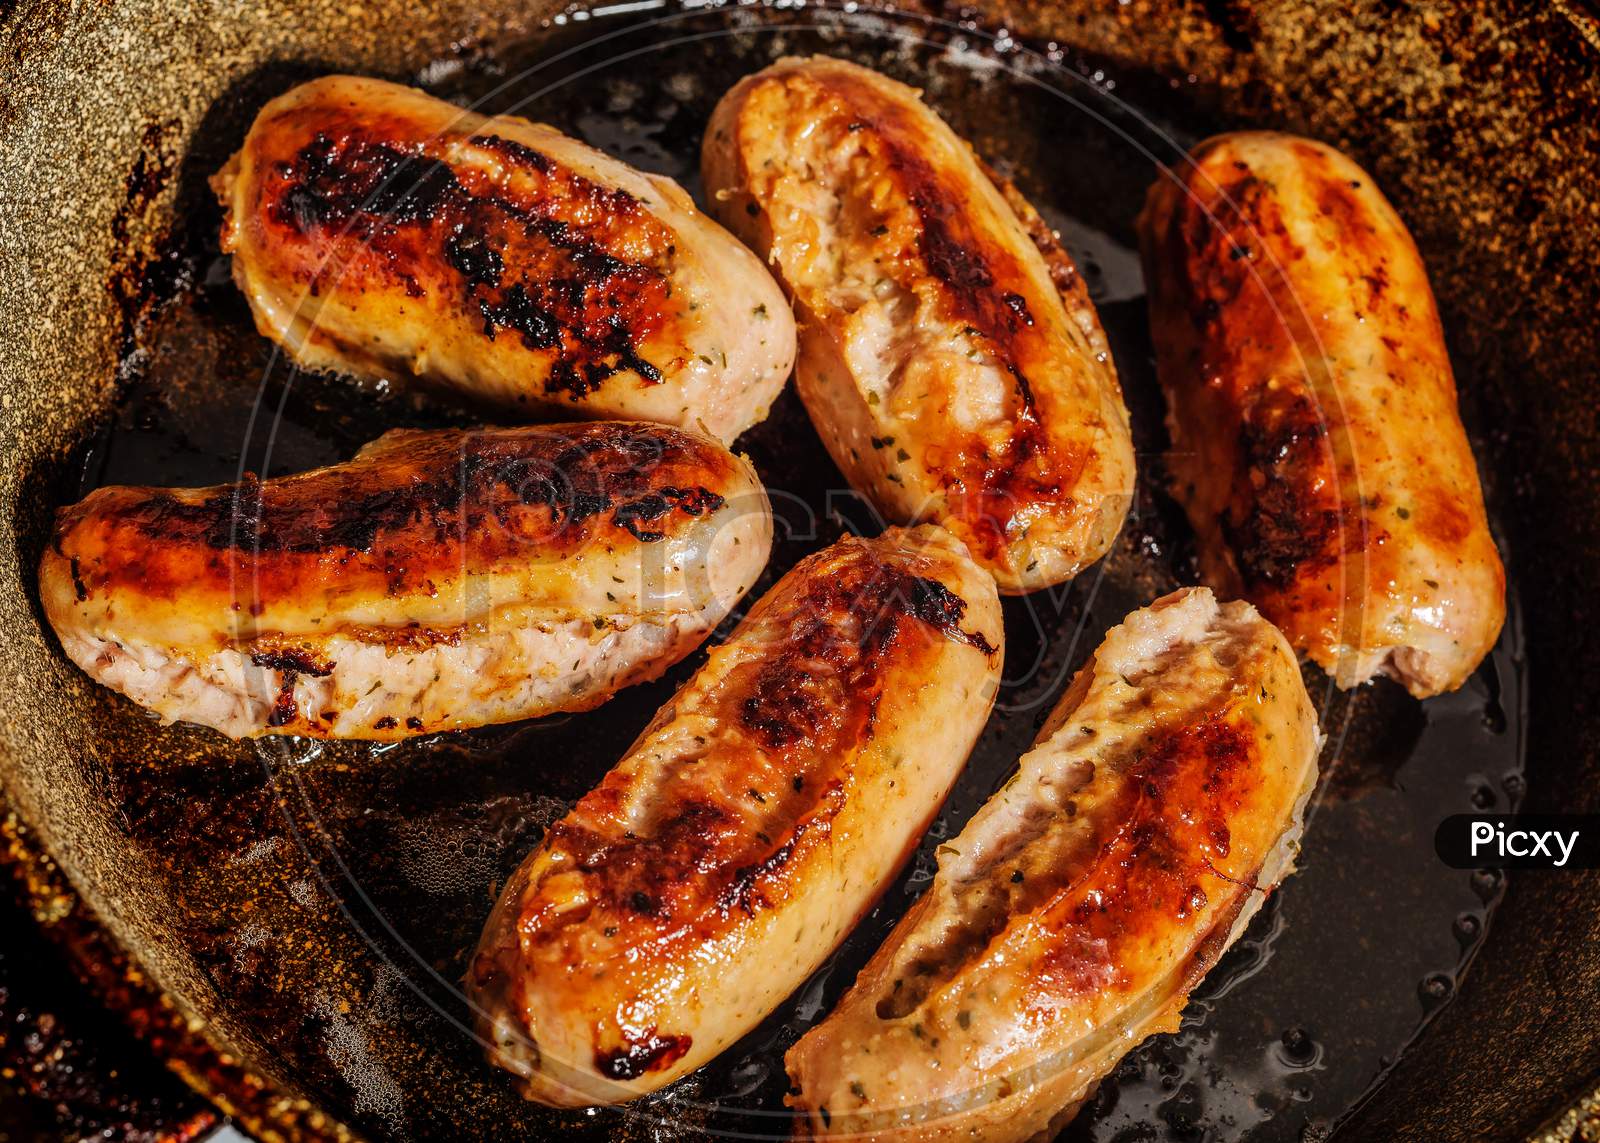 Six burnt fried German hunting sausages in a burnt frying pan